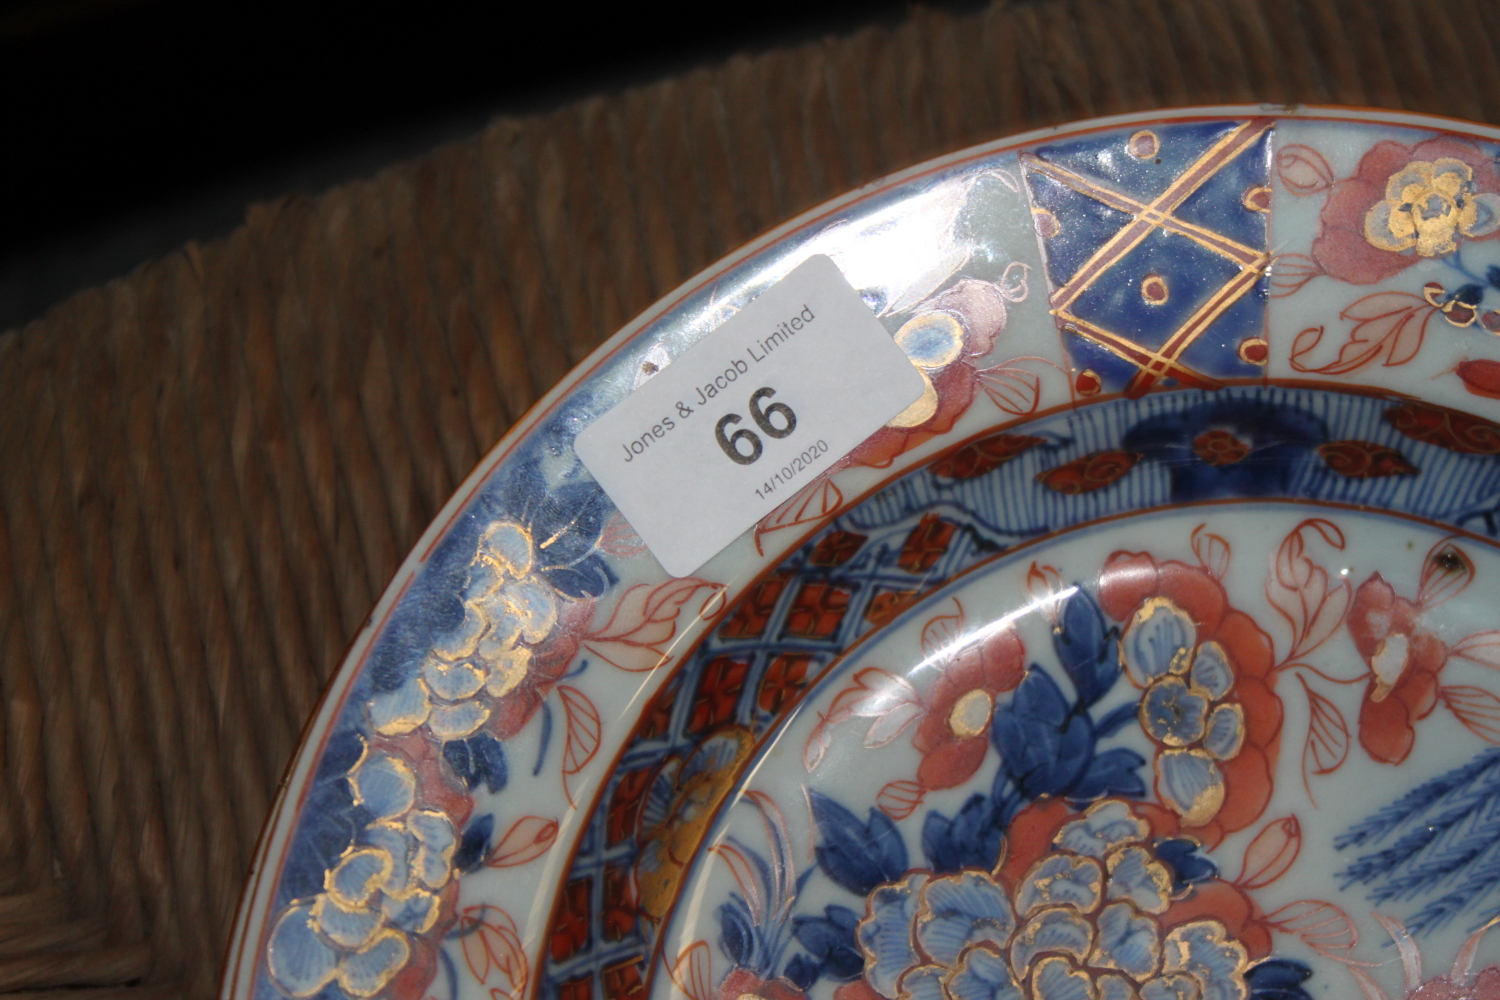 Five 18th century Chinese Imari decorated shallow bowls with gilt highlights, 9" dia (damages) - Image 13 of 14